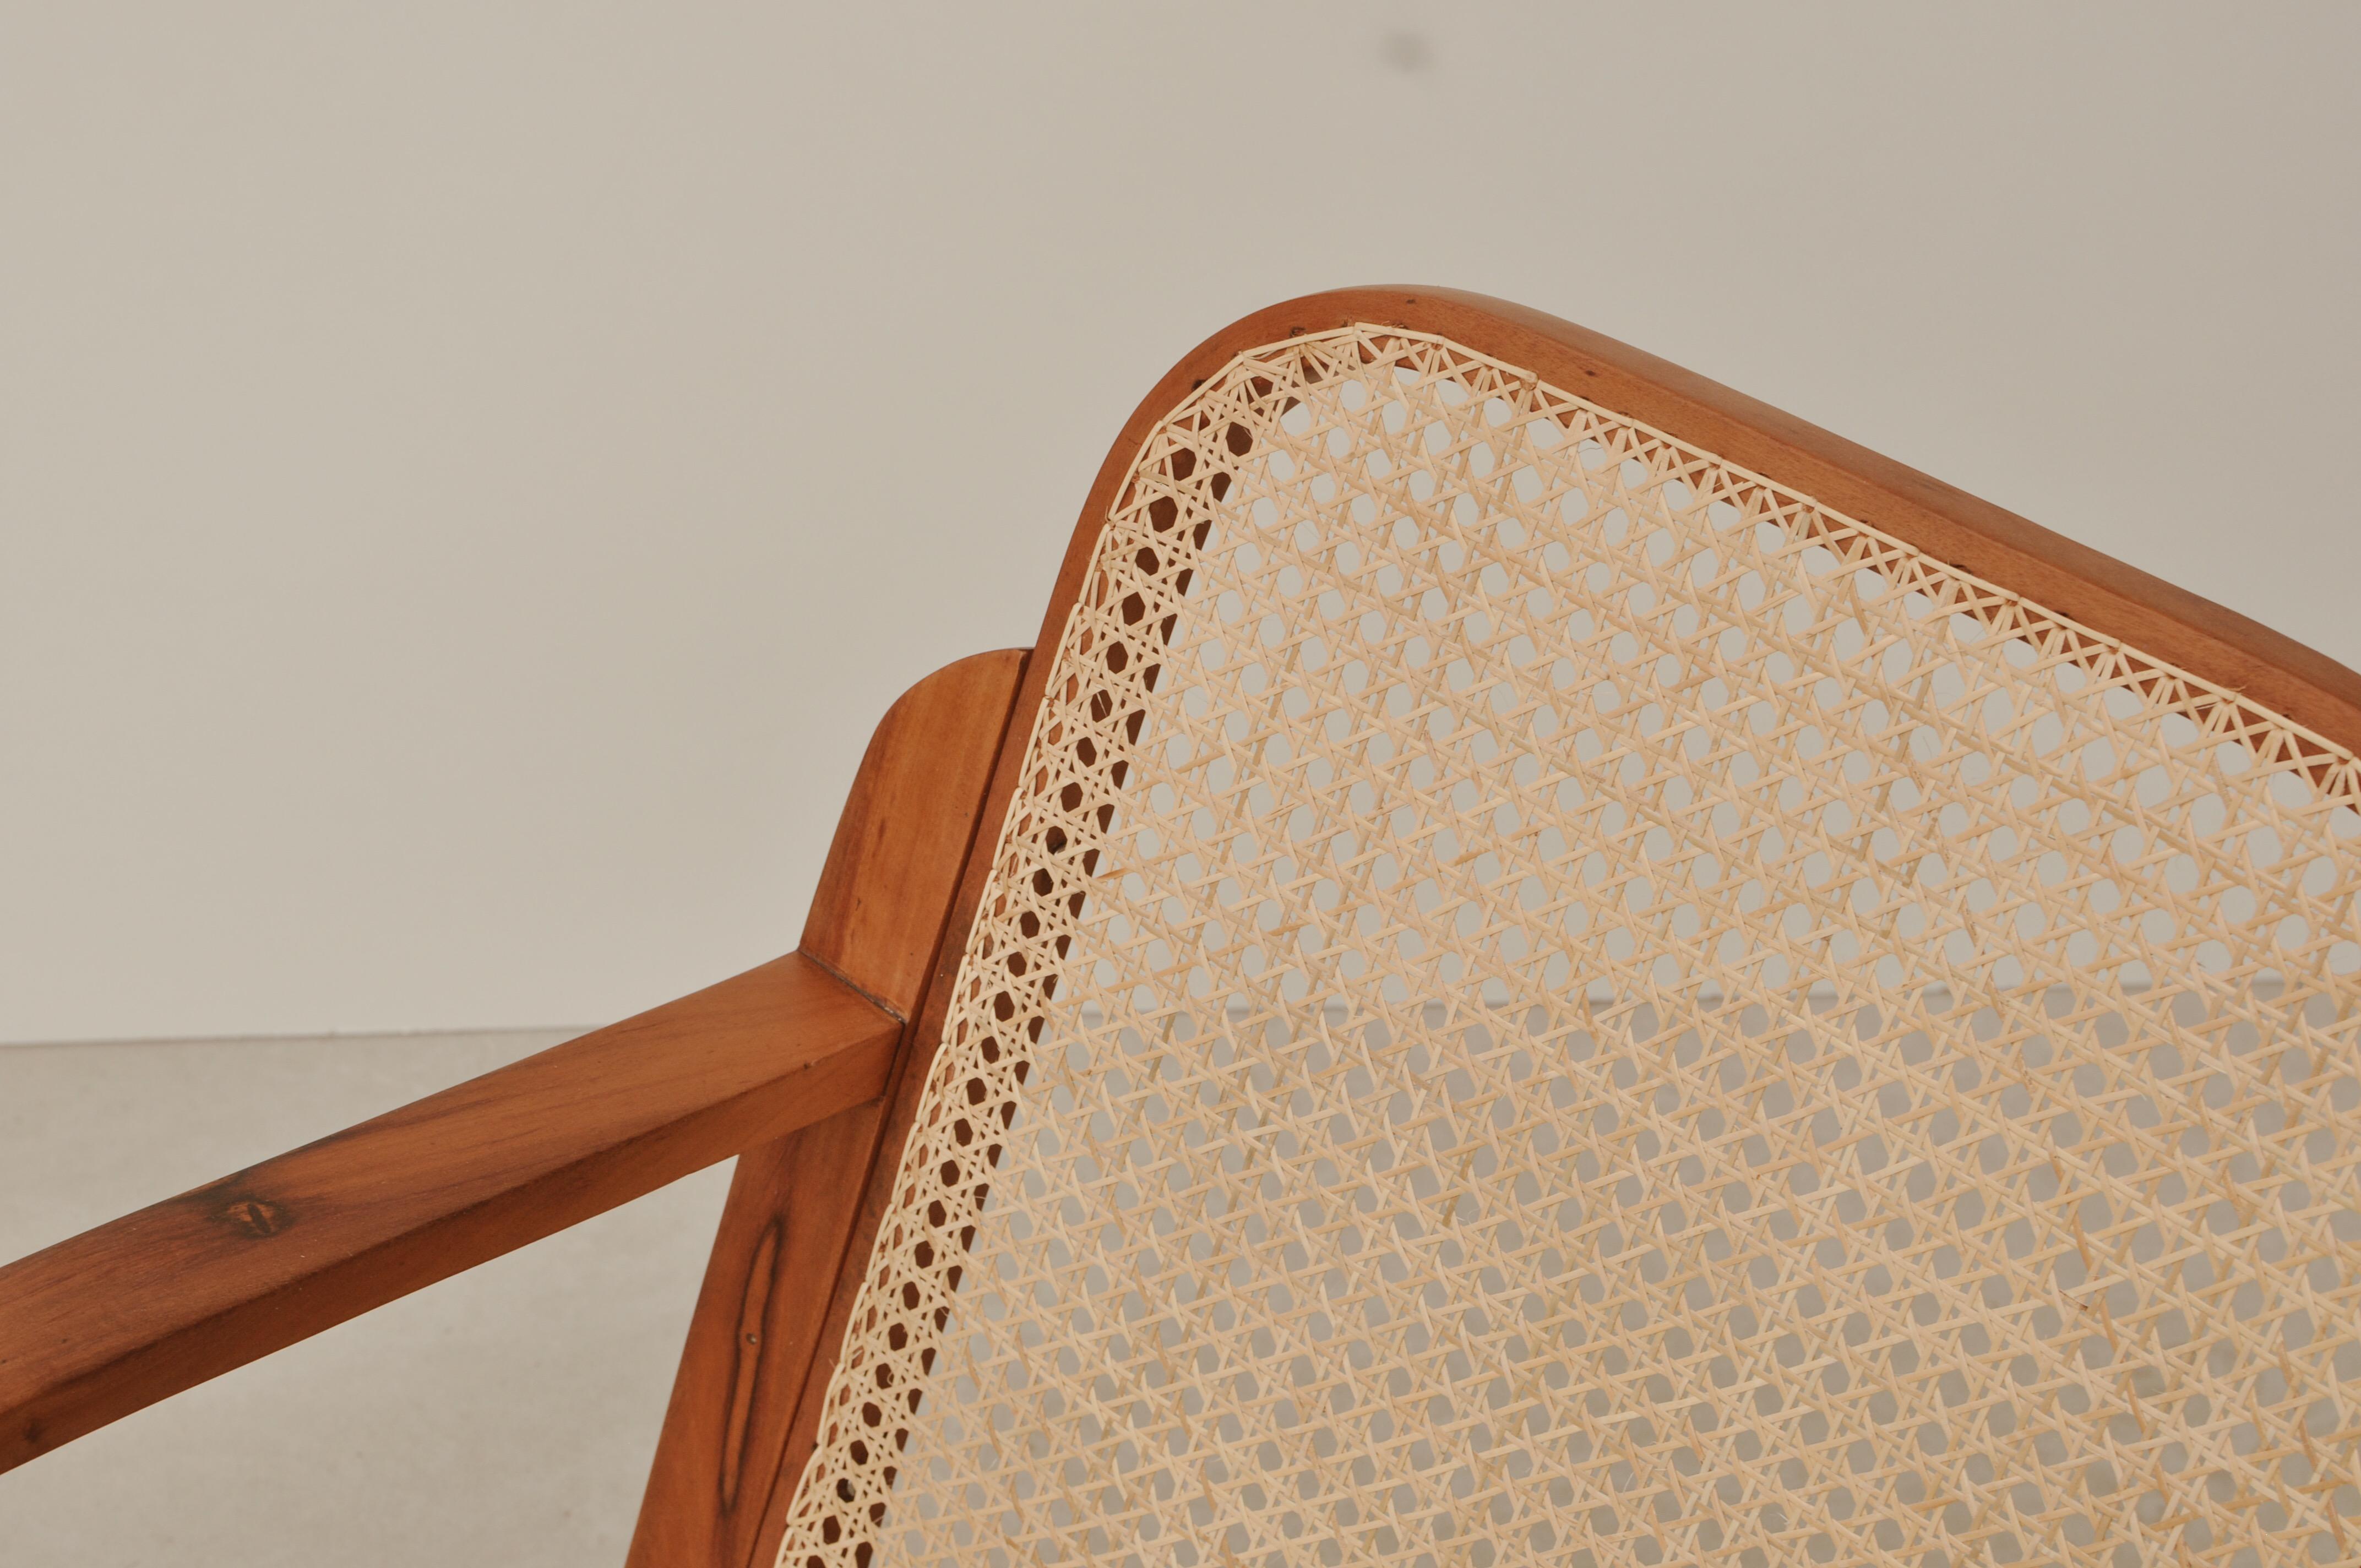 Caning Brazilian Mid-century Armchair in Bent Wood and Cane by Gerdau